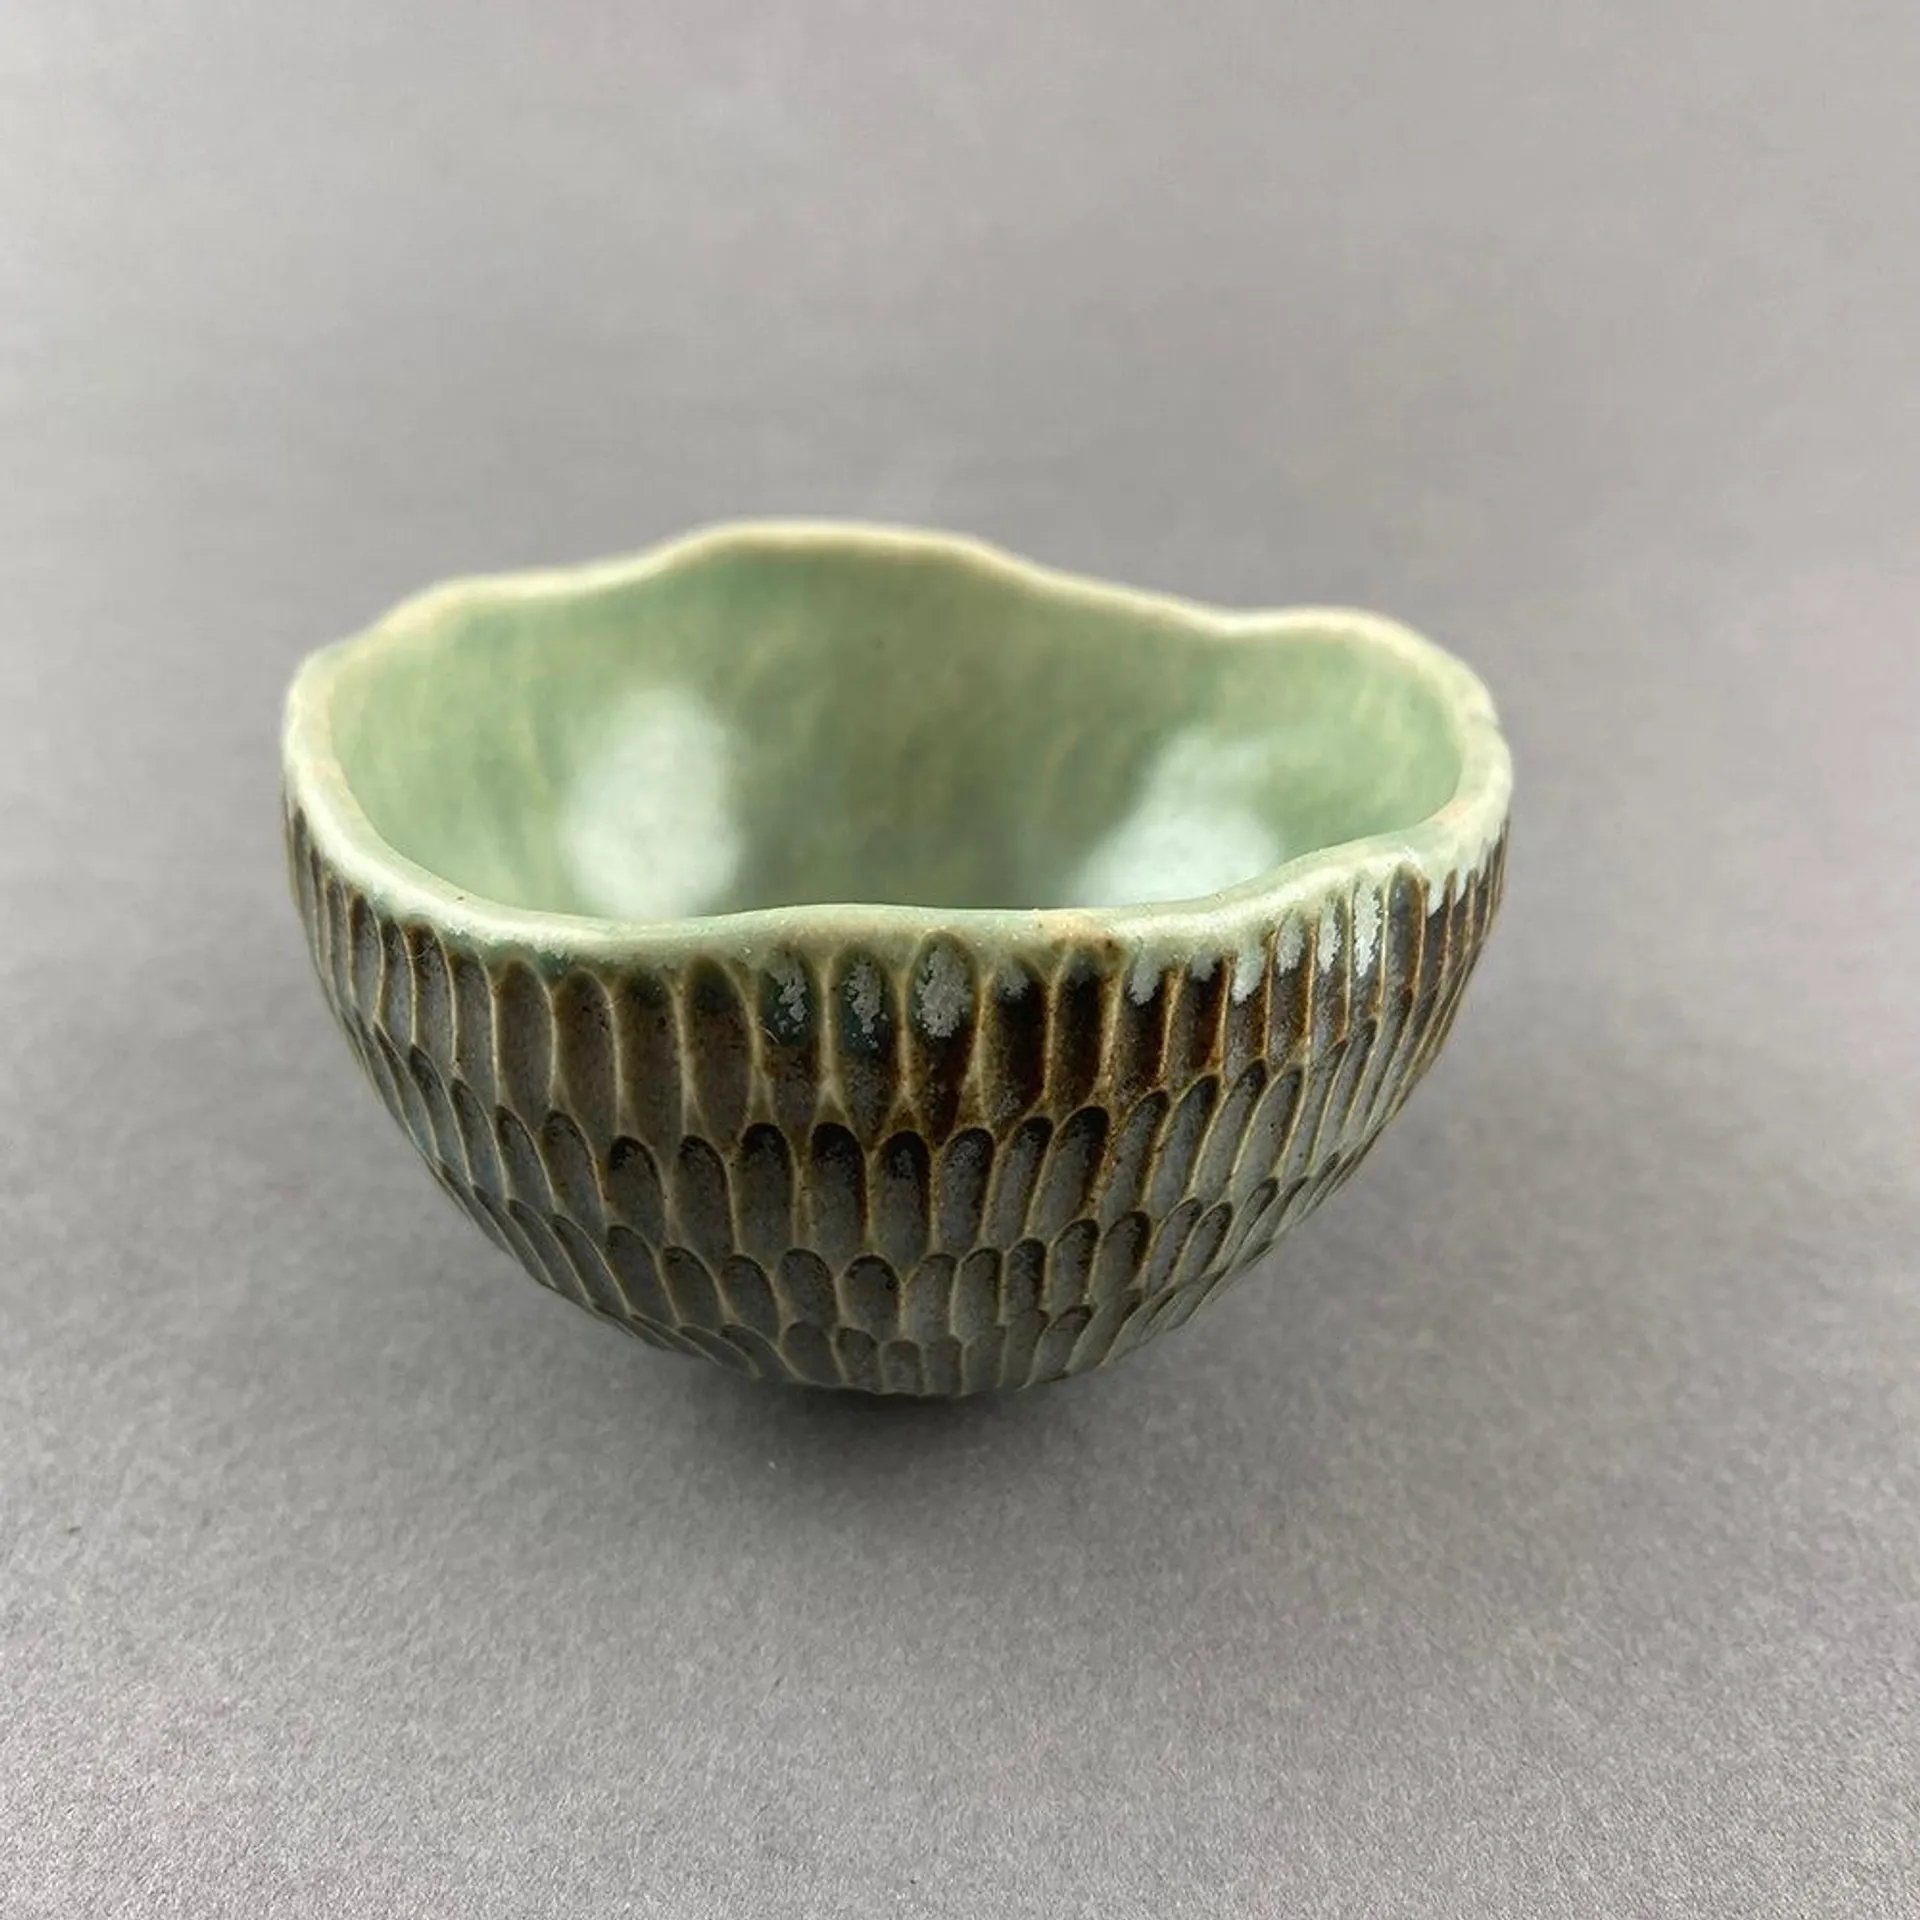 Little Carved Bowl - Turquoise